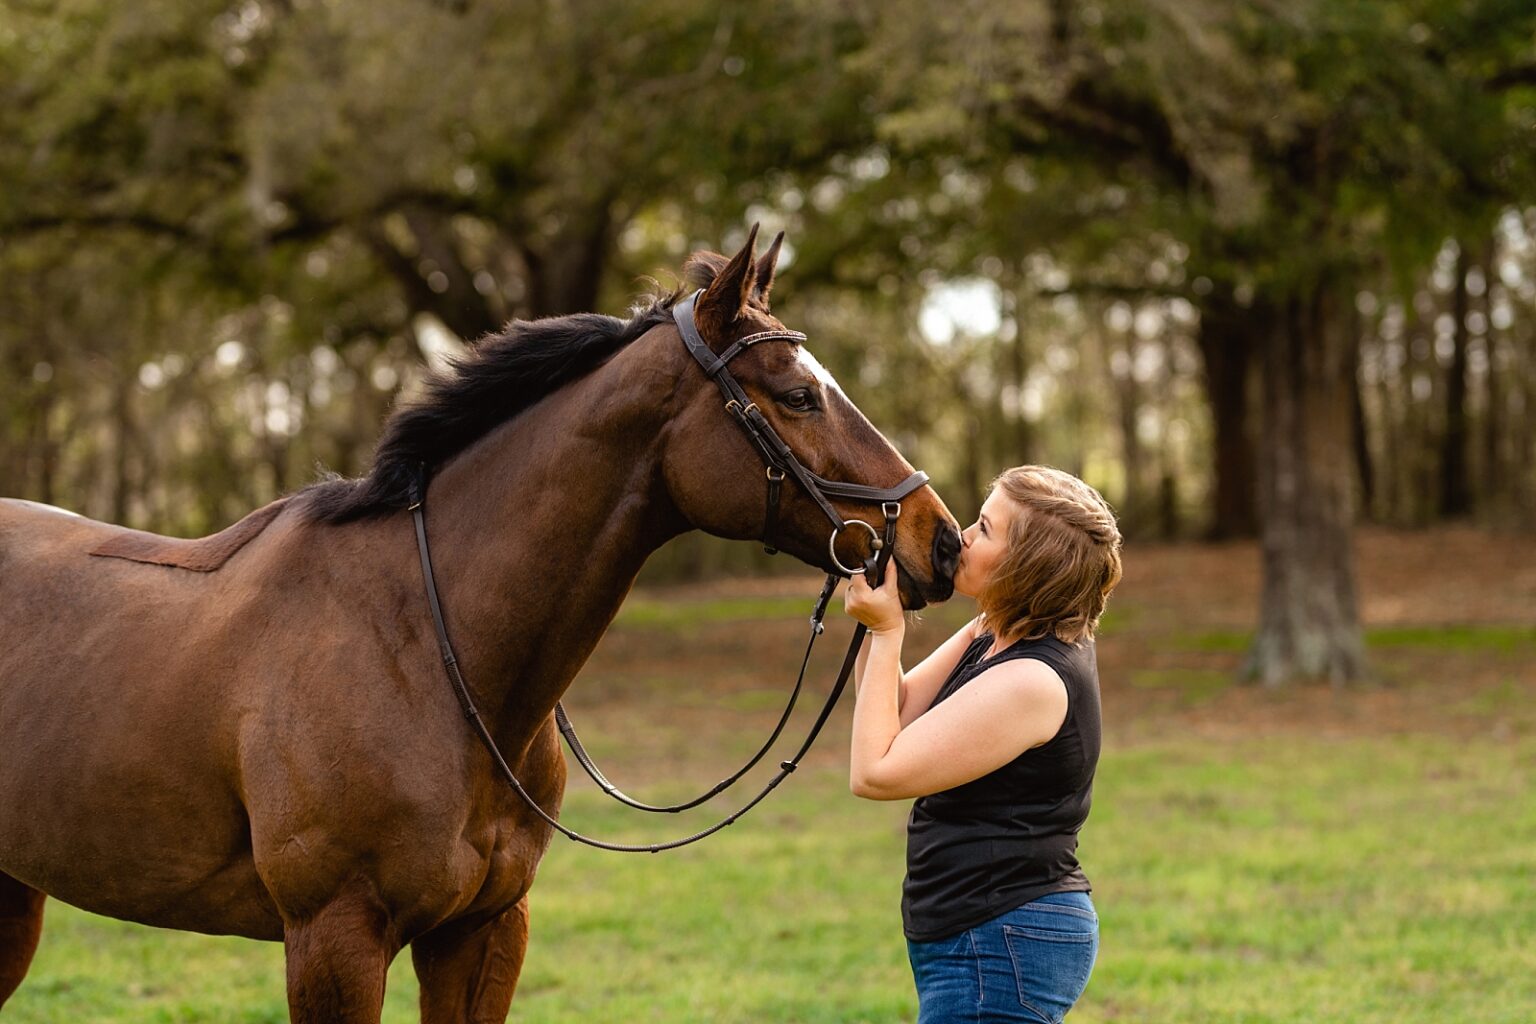 Game On Eventing. Photos of Eventer with her two horses near Ocala, Florida. Professional equine photographer near Ocala and Gainesville, FL.